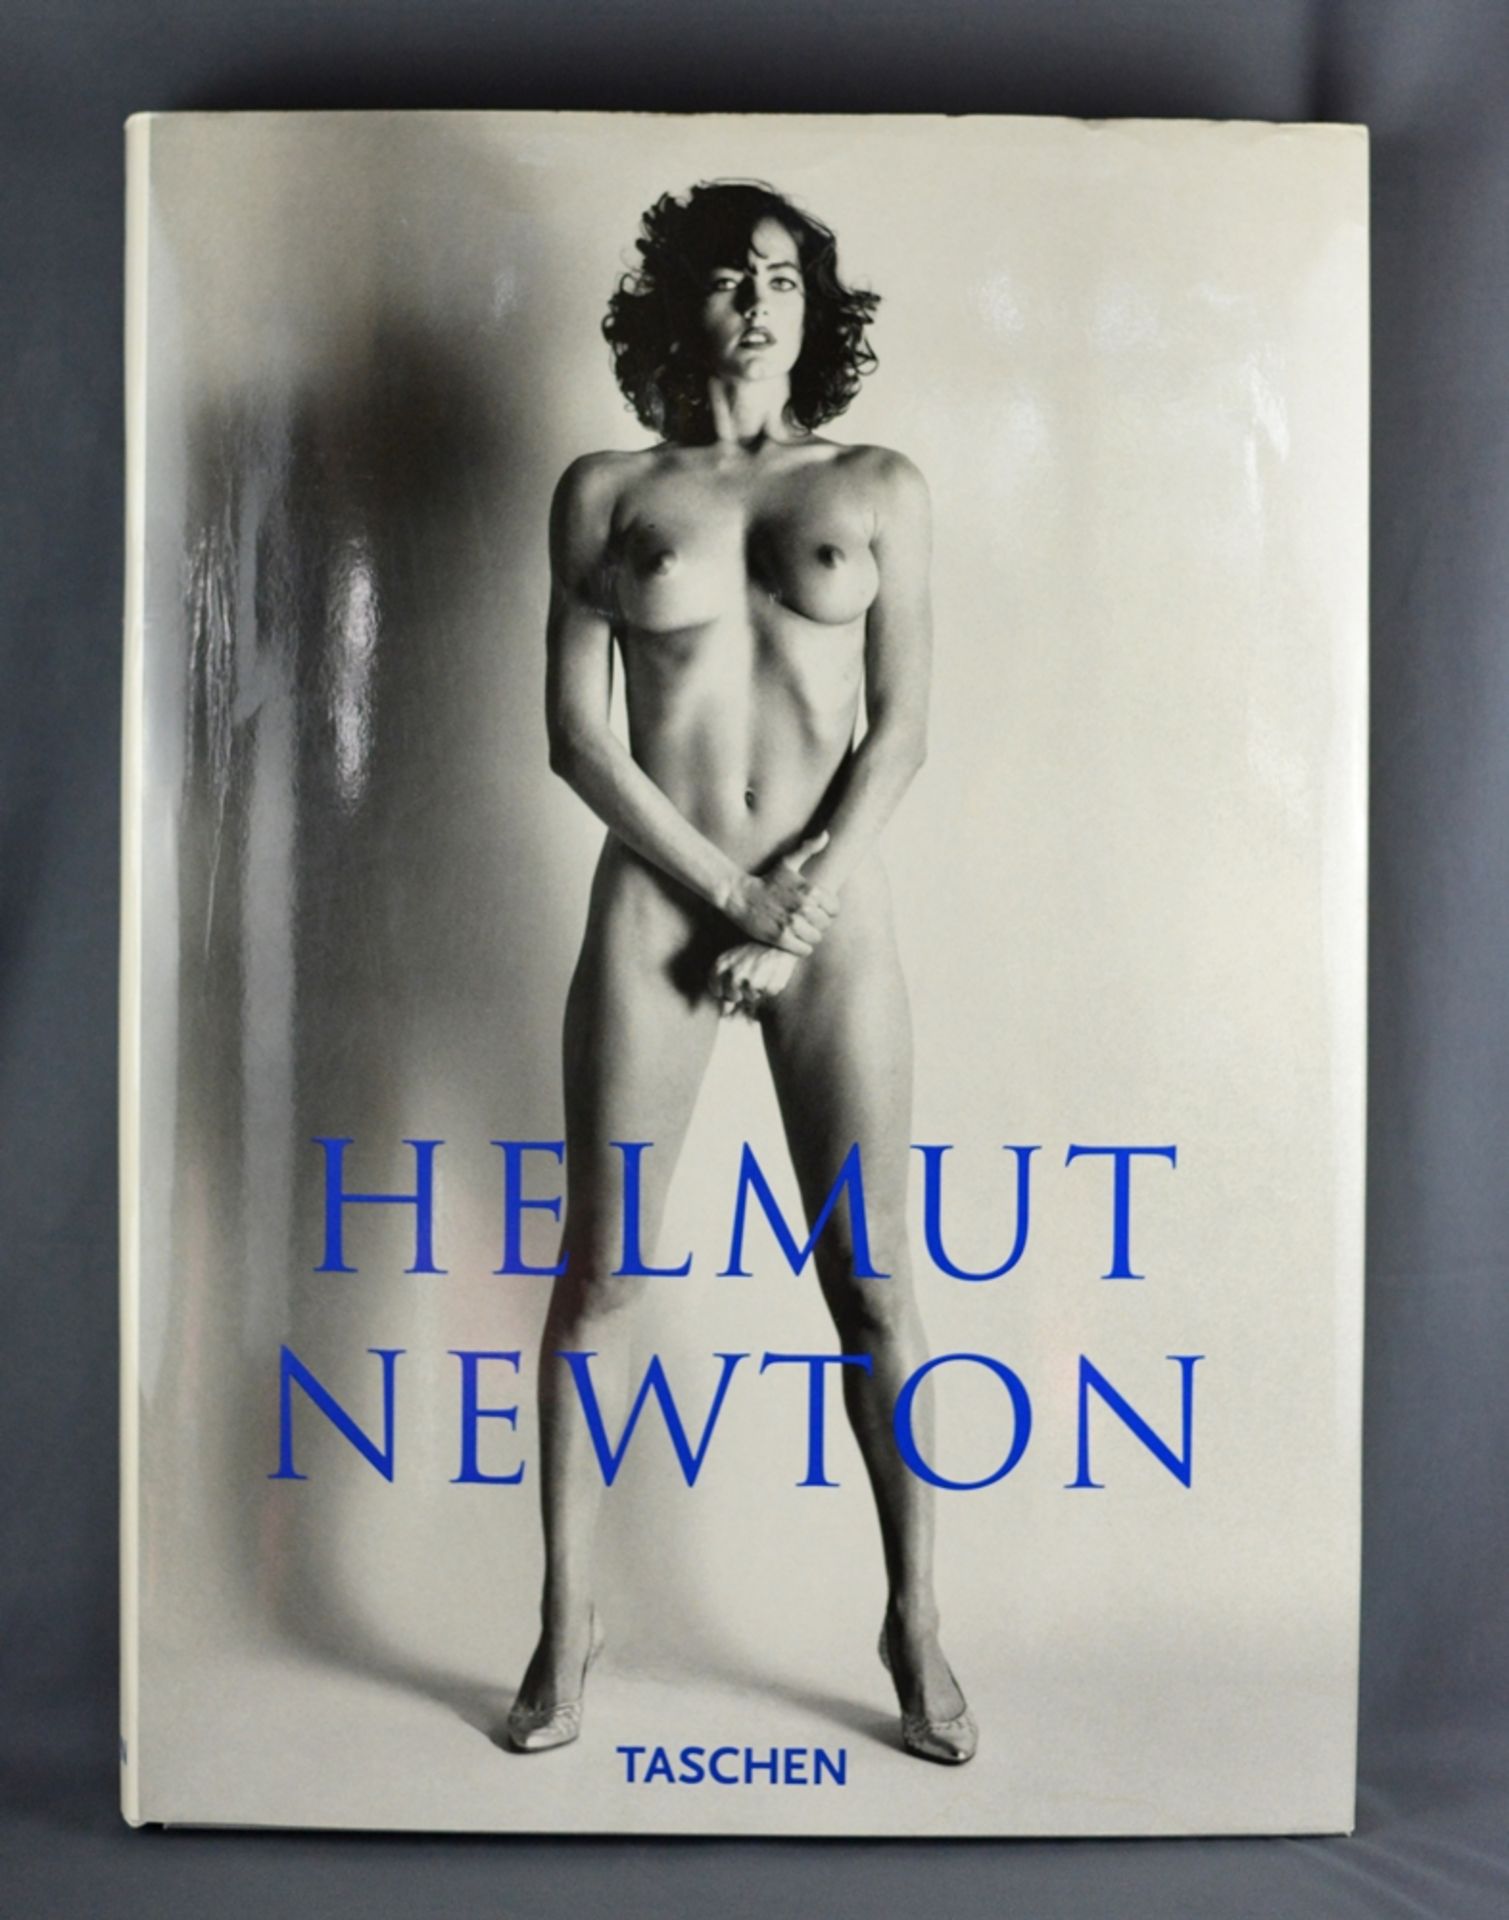 Helmut Newton's SUMO, edition of 10.000 copies, stamped by hand and signed by Helmut Newton, copy 4